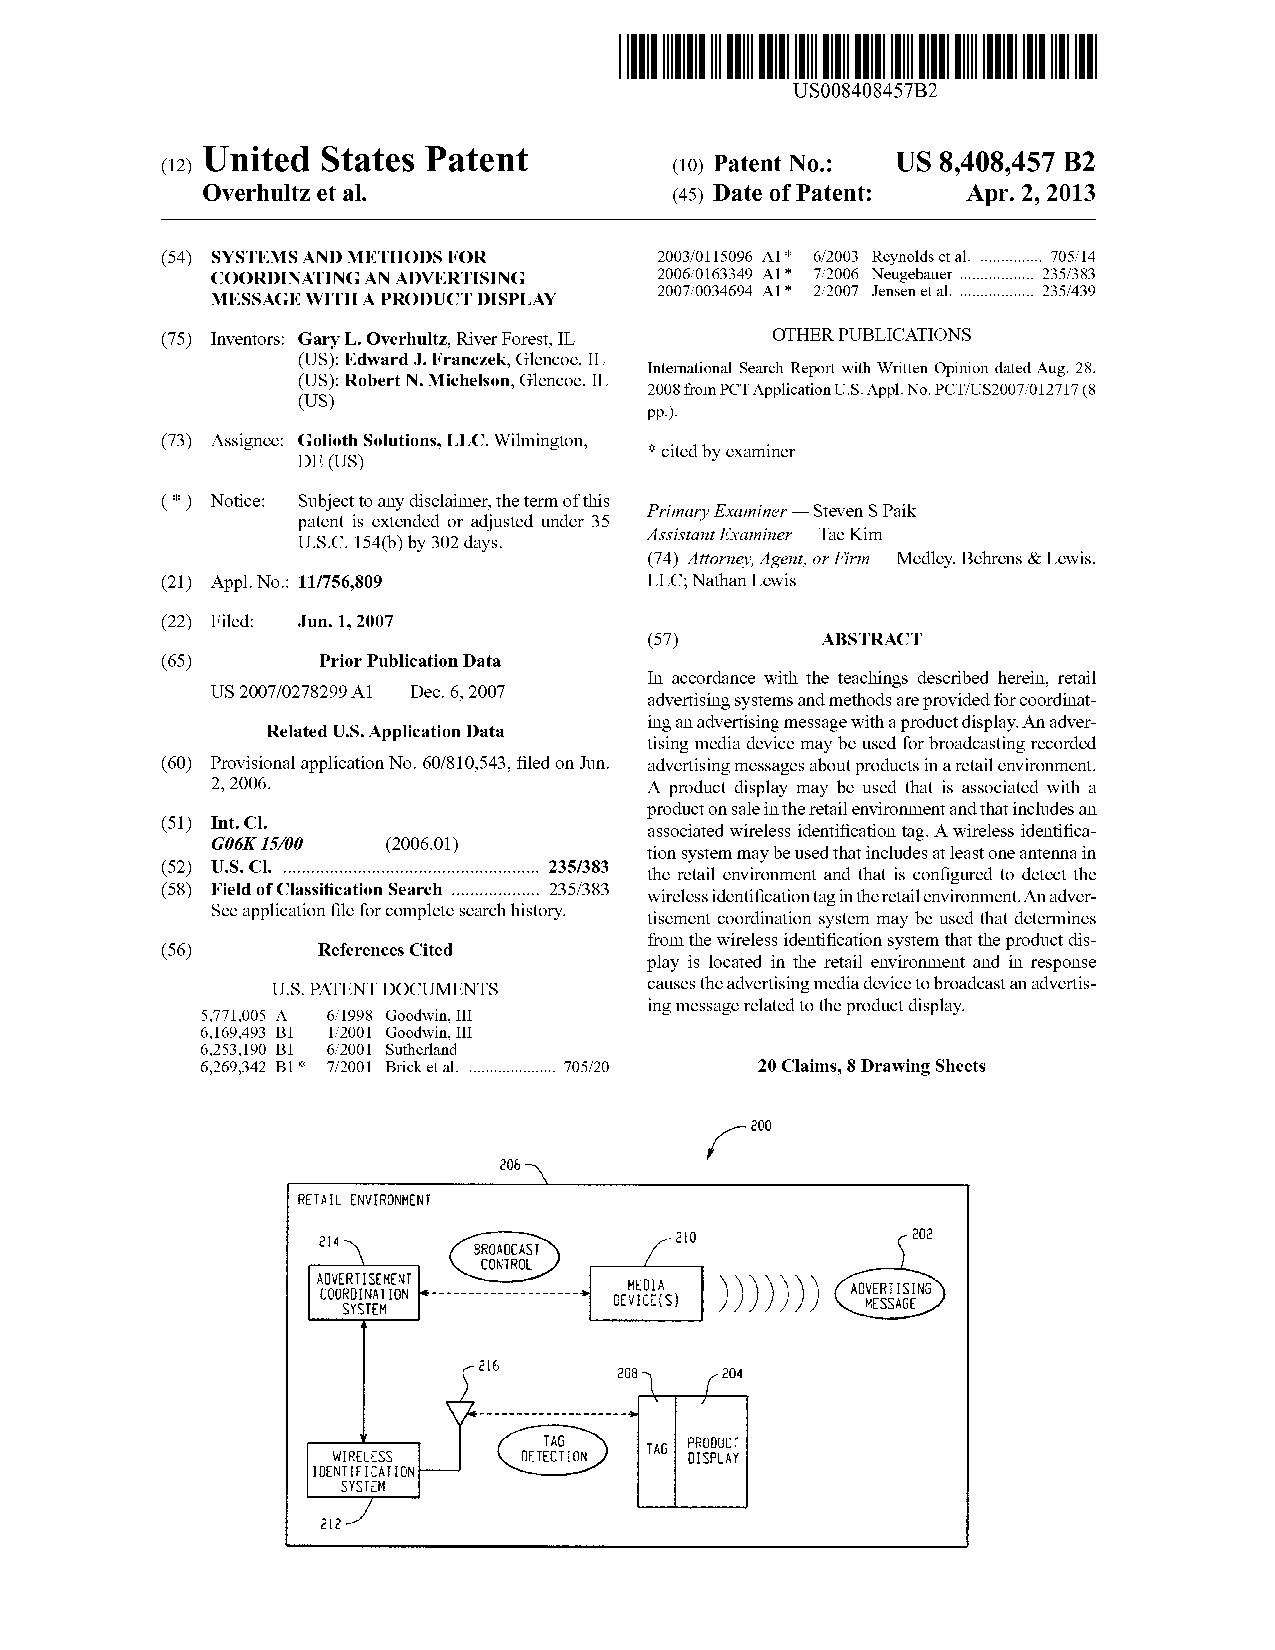 Systems and methods for coordinating an advertising message with a product     display - Patent 8,408,457